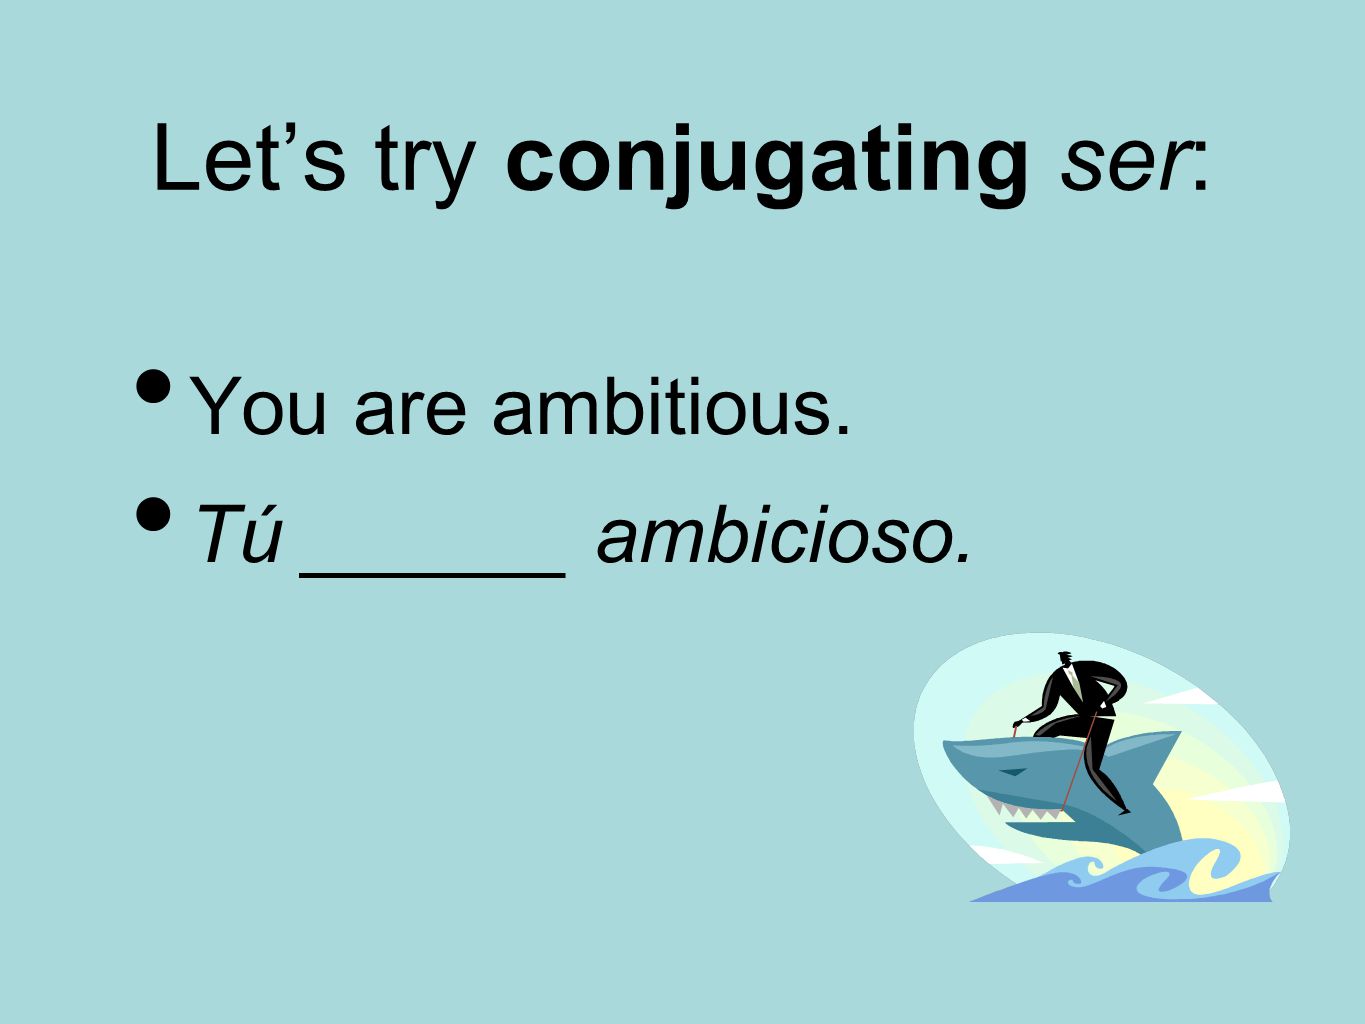 Let’s try conjugating ser: You are ambitious. Tú ______ ambicioso.